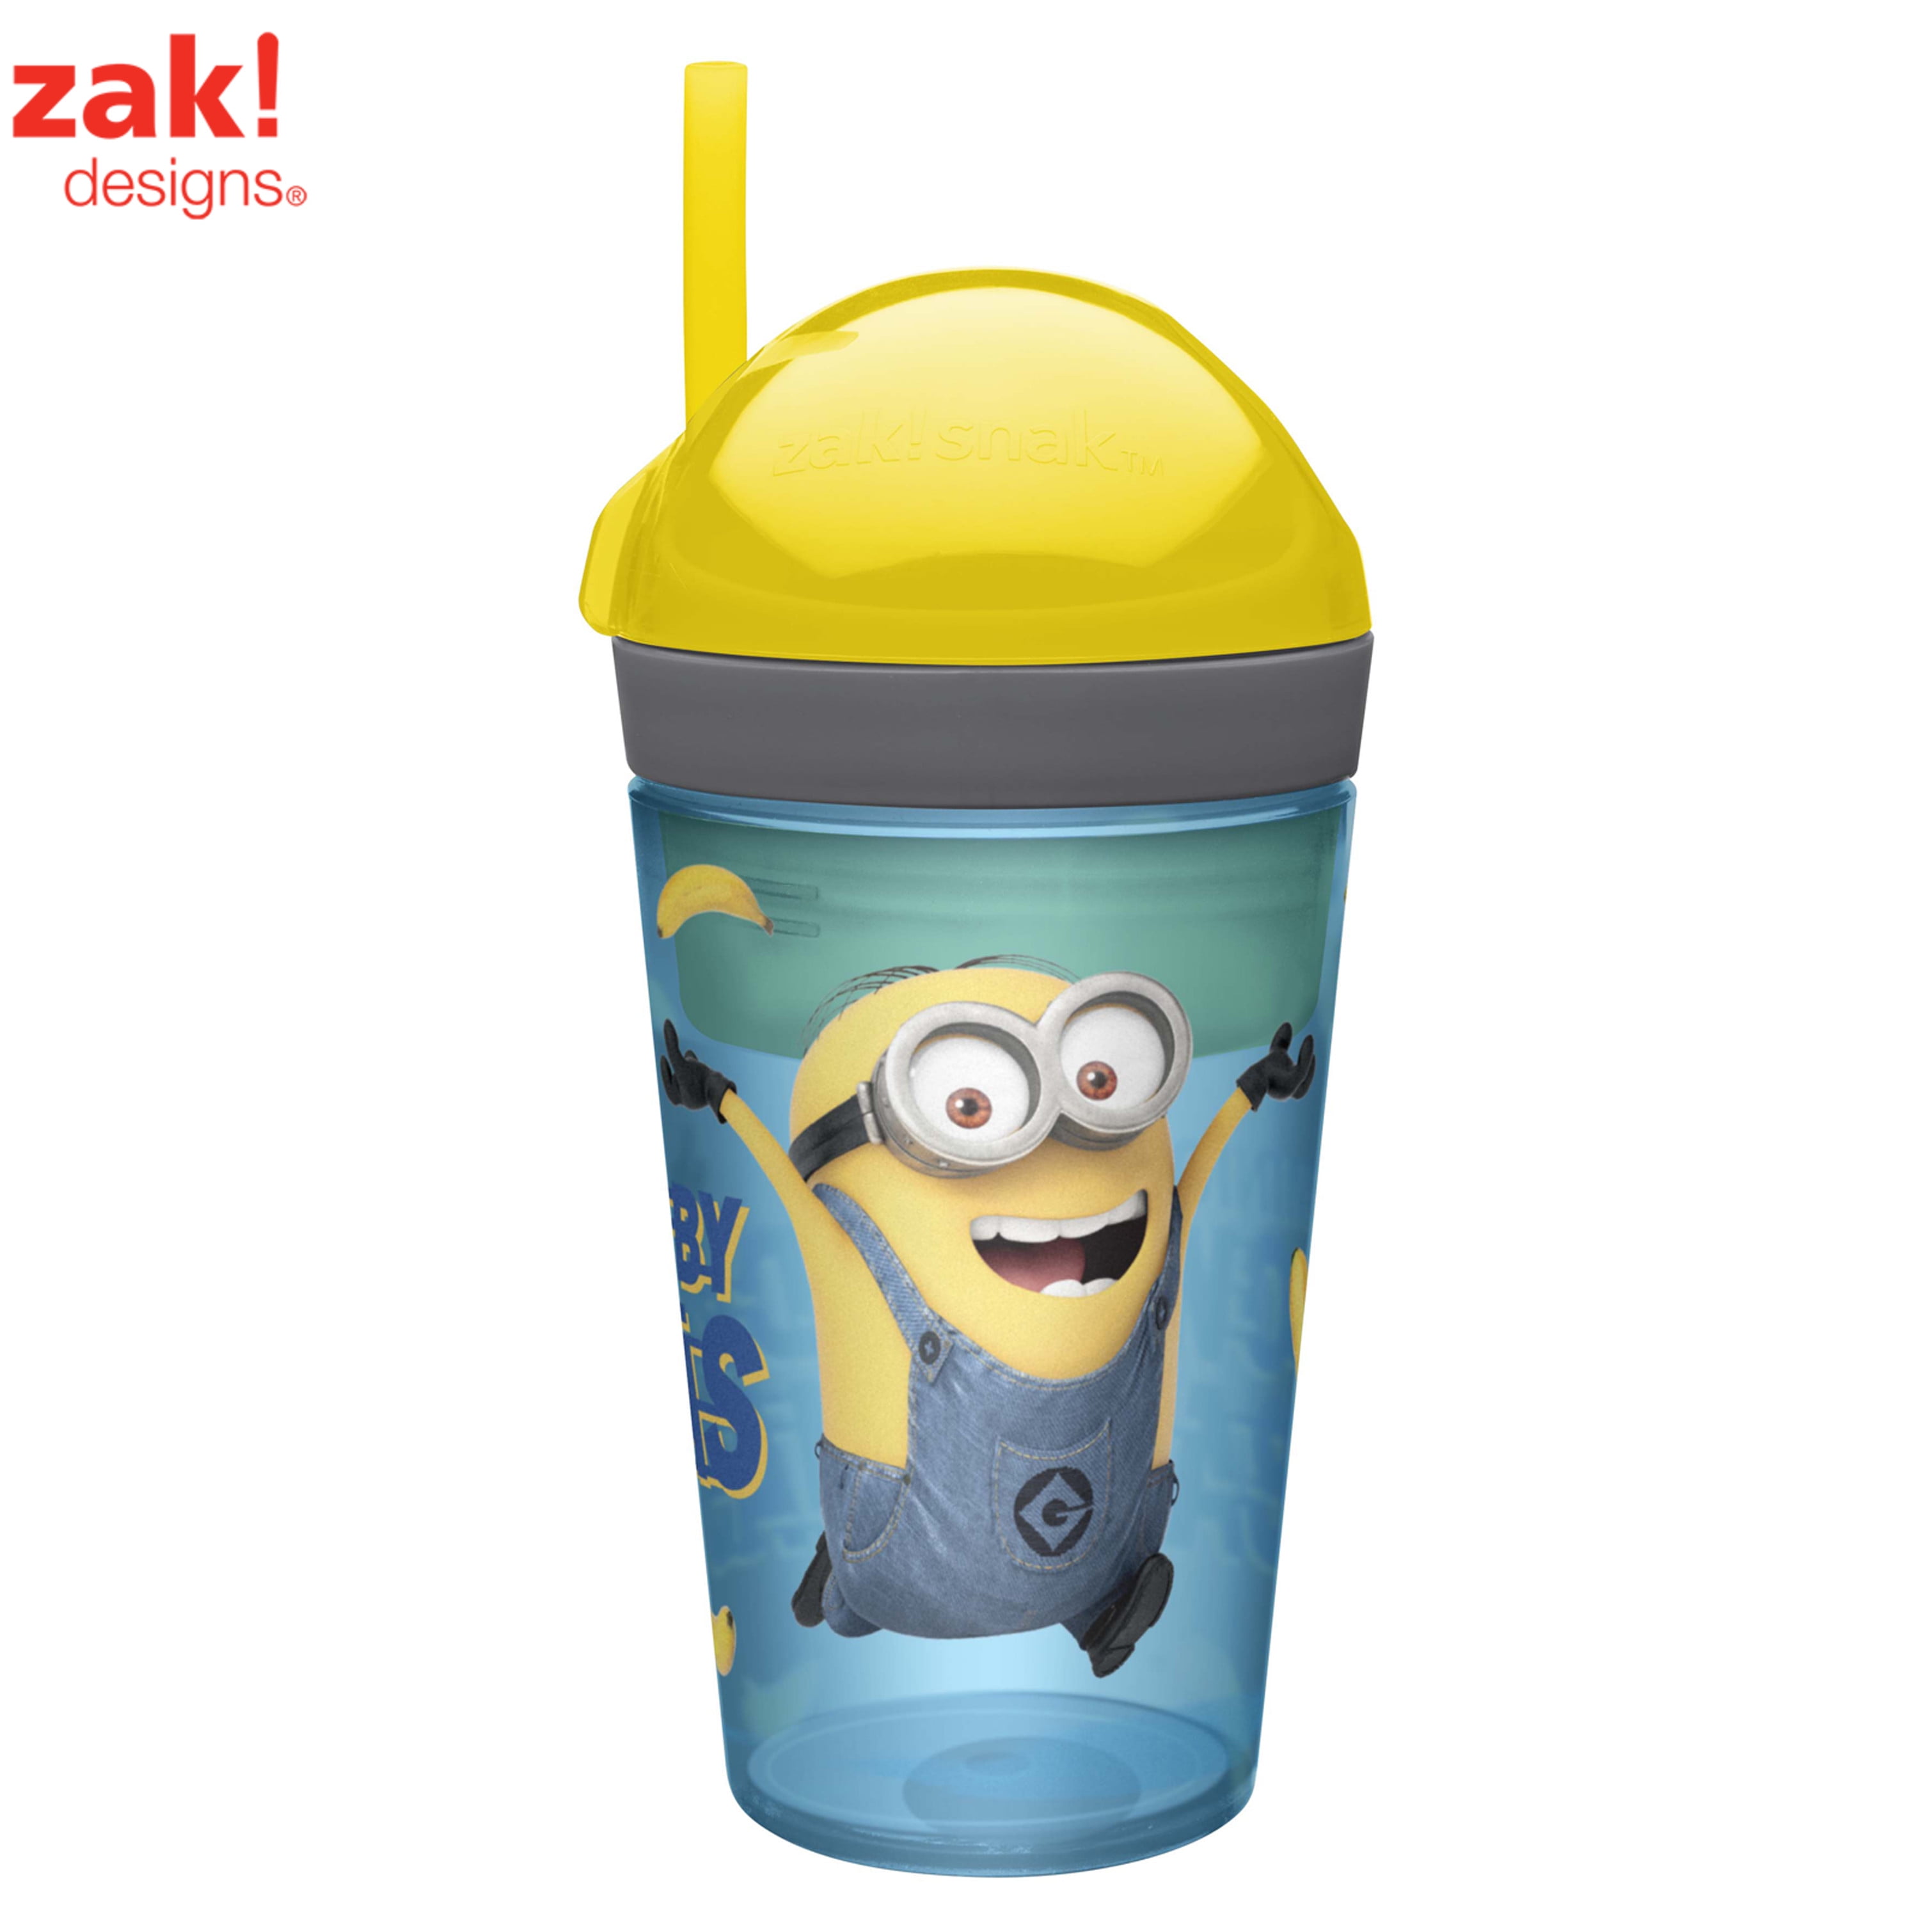 Dispicable Me Minion Snackeez 2 in 1 Snack 4 oz & Drink Cup 8 oz Holder by  Zak